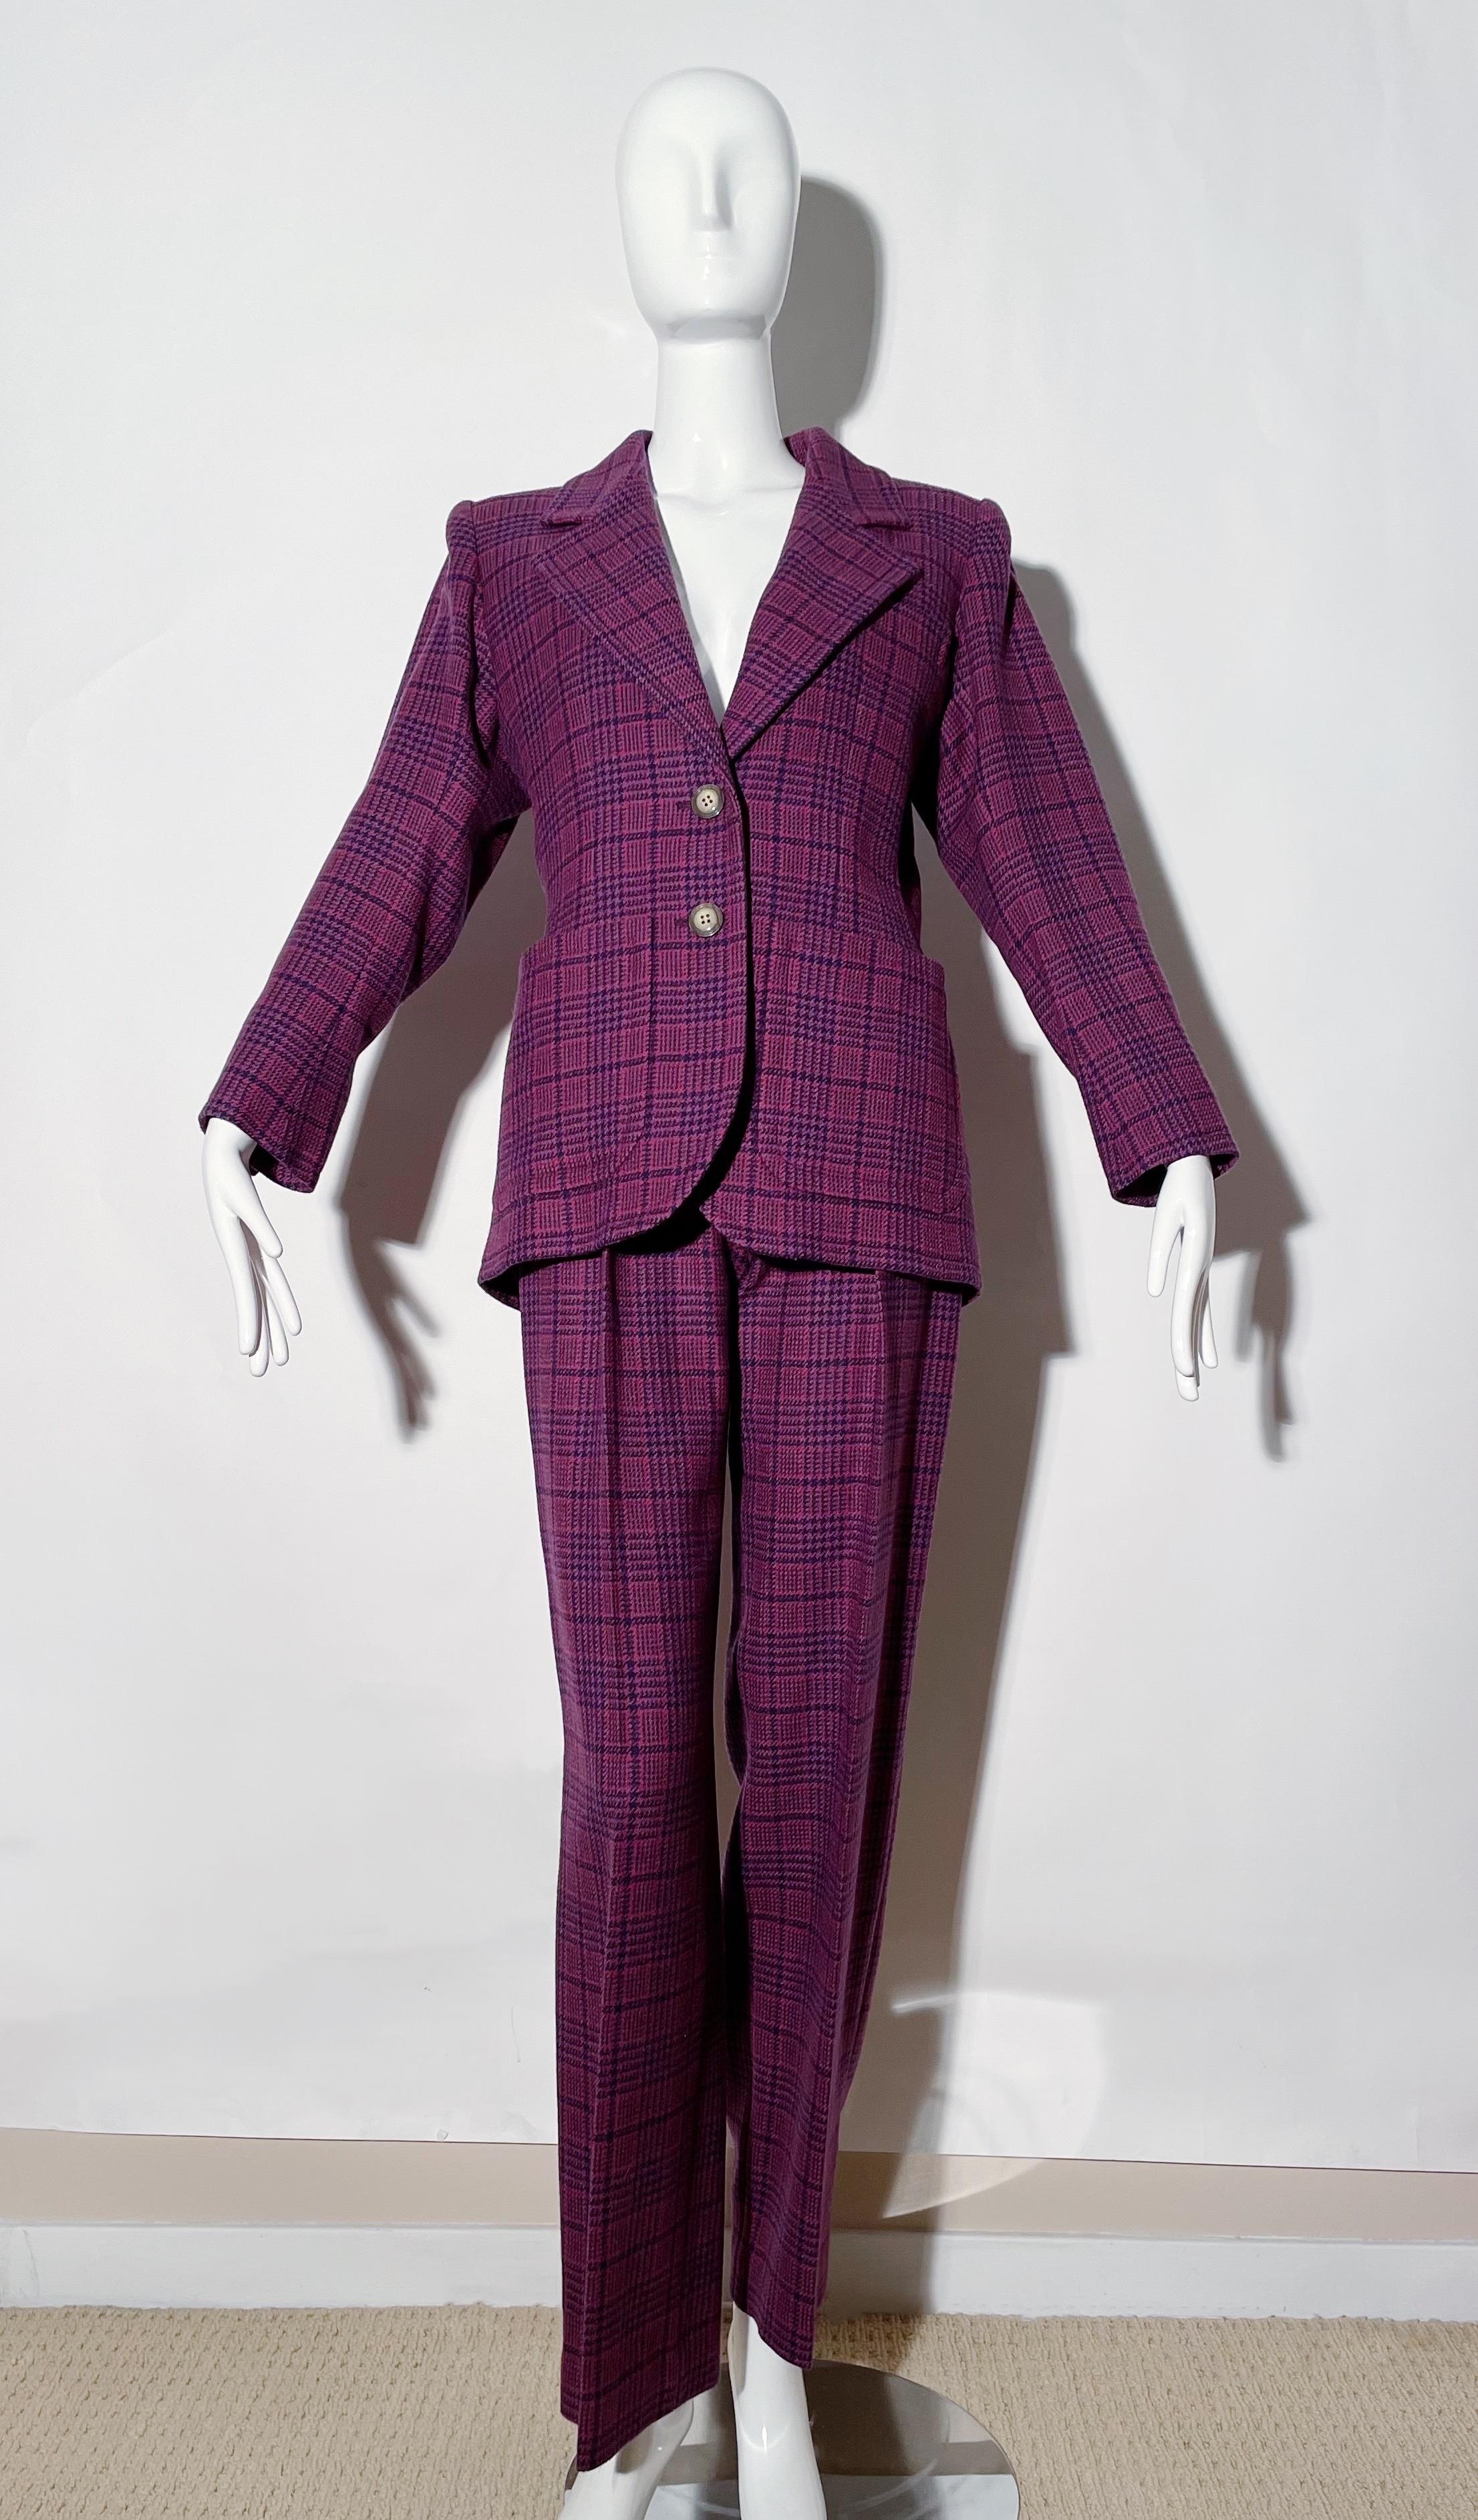 Purple plaid suit. Front button closures. Front pockets. Shoulder pads. Pleated trousers. Front zipper on trousers. Lined. Wool. Made in France. 
*Condition: excellent vintage condition. No visible flaws.

Measurements Taken Laying Flat